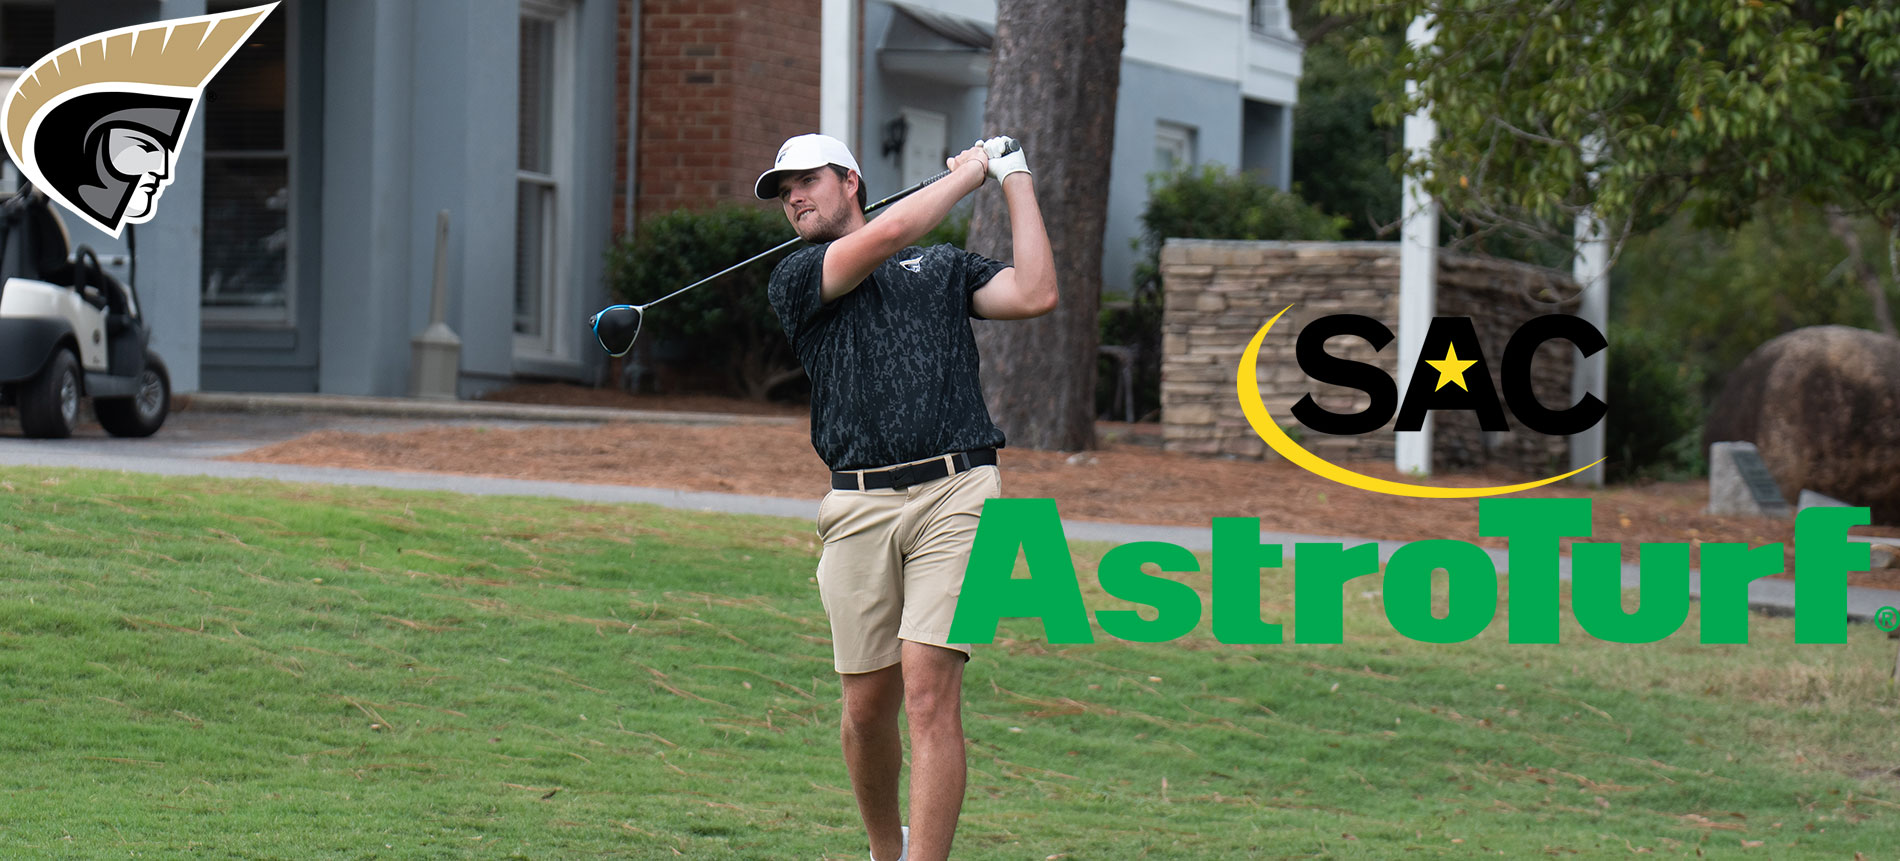 Coleman Named South Atlantic Conference AstroTurf Men’s Golfer of the Week